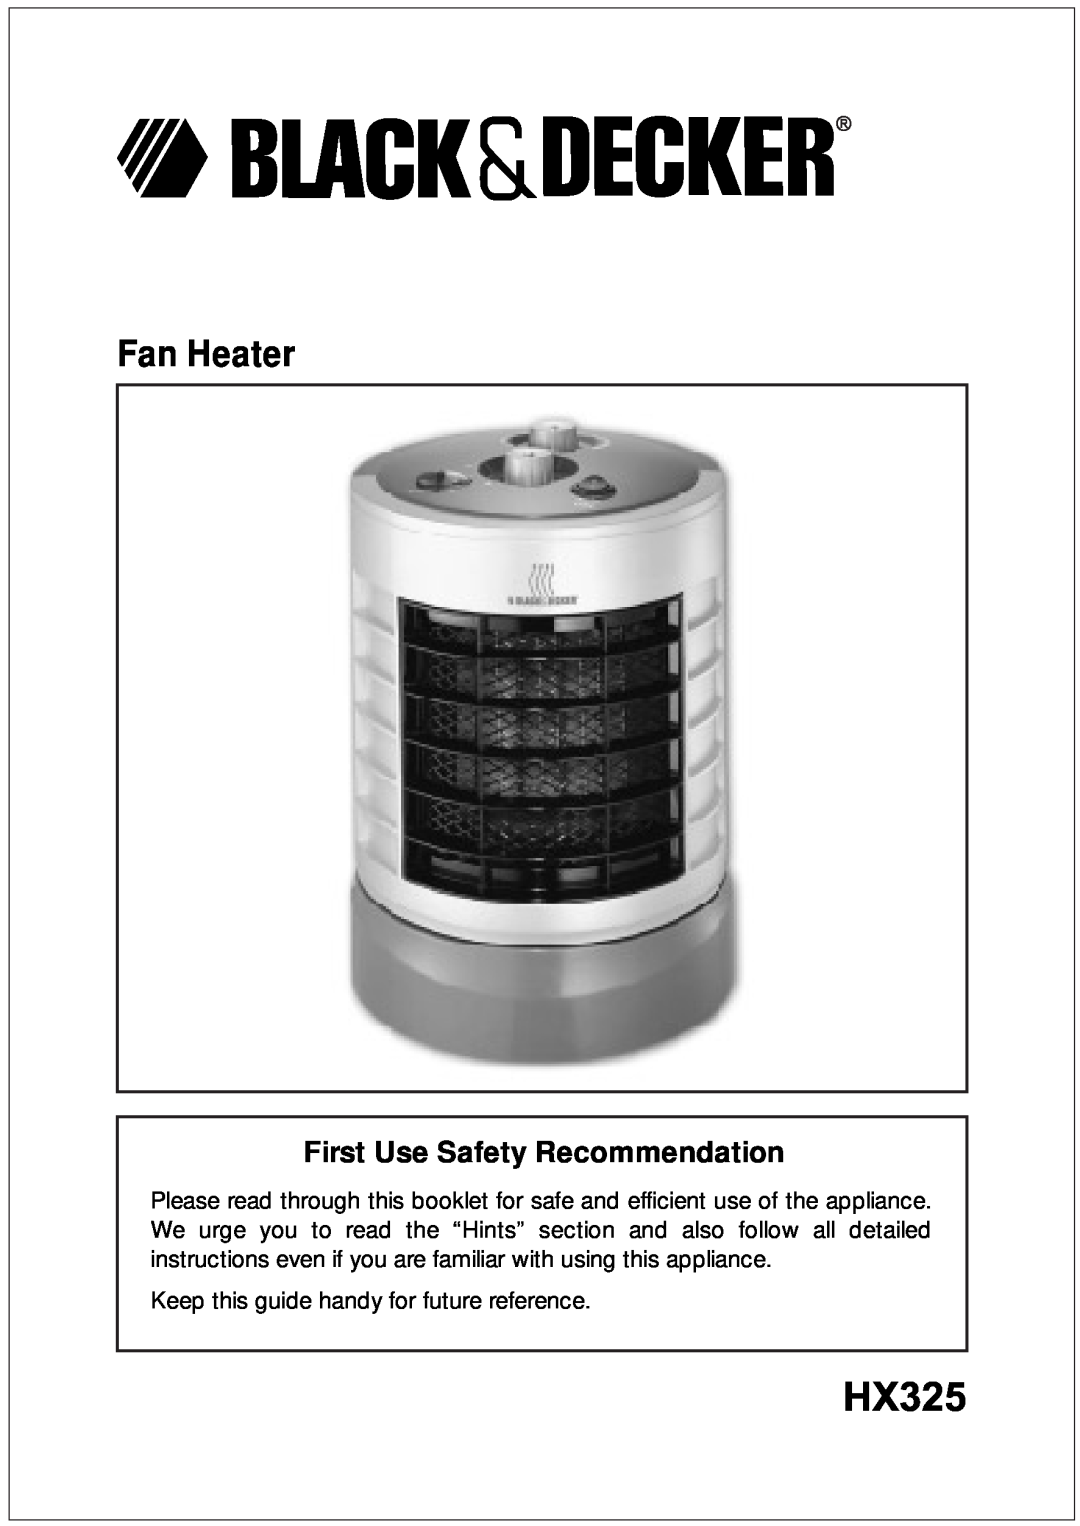 Black & Decker HX325 manual Keep this guide handy for future reference, Fan Heater, First Use Safety Recommendation 